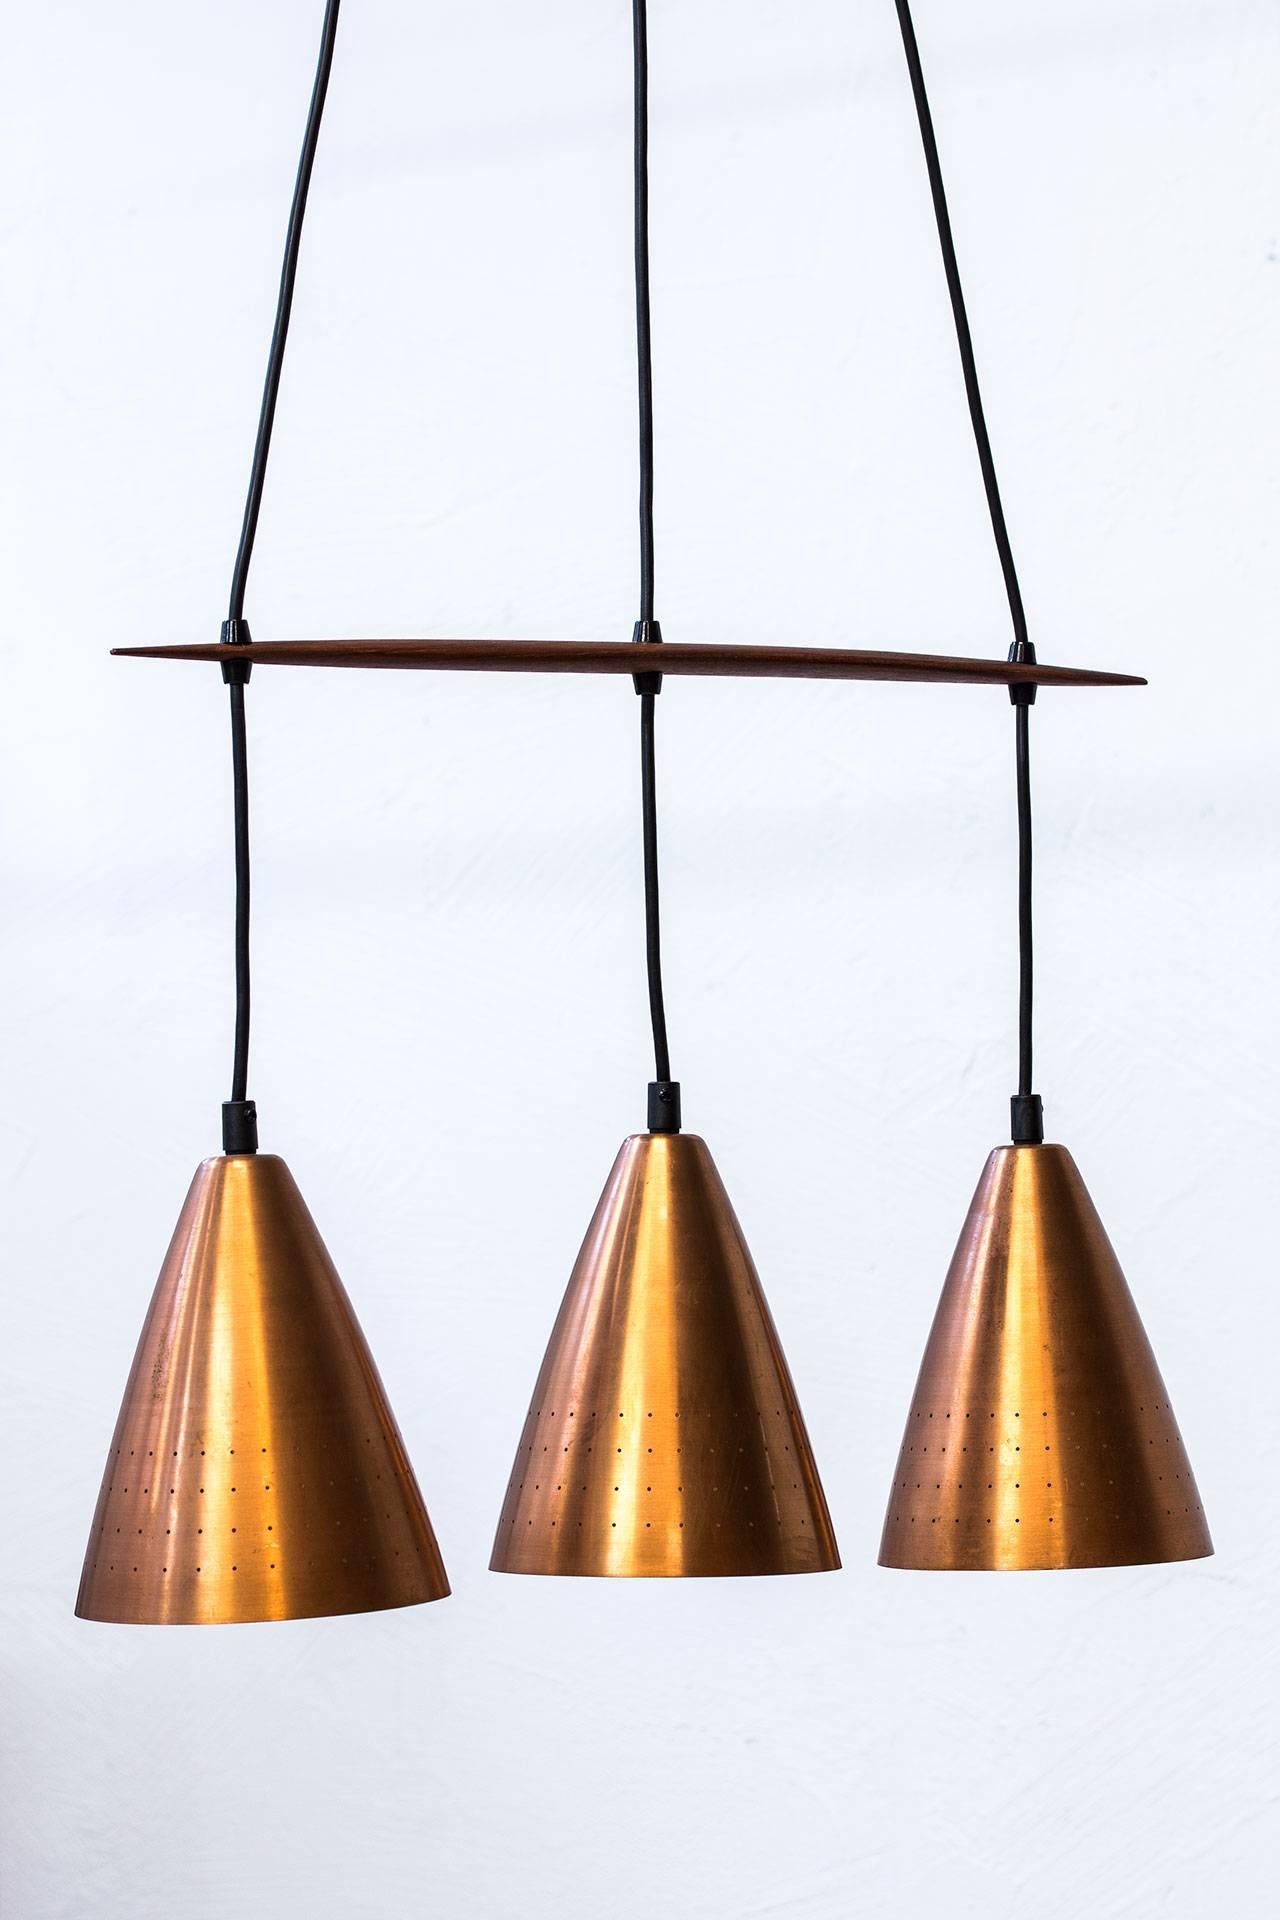 Ceiling lamp in copper and teak designed by Hans-Agne Jakobsson, in Åhus, Sweden. Model from the early 1950s with three perforated copper shades. Copper ceiling cup.
Stretcher in teak. Adjustable height. New electricity. 2 pieces available.